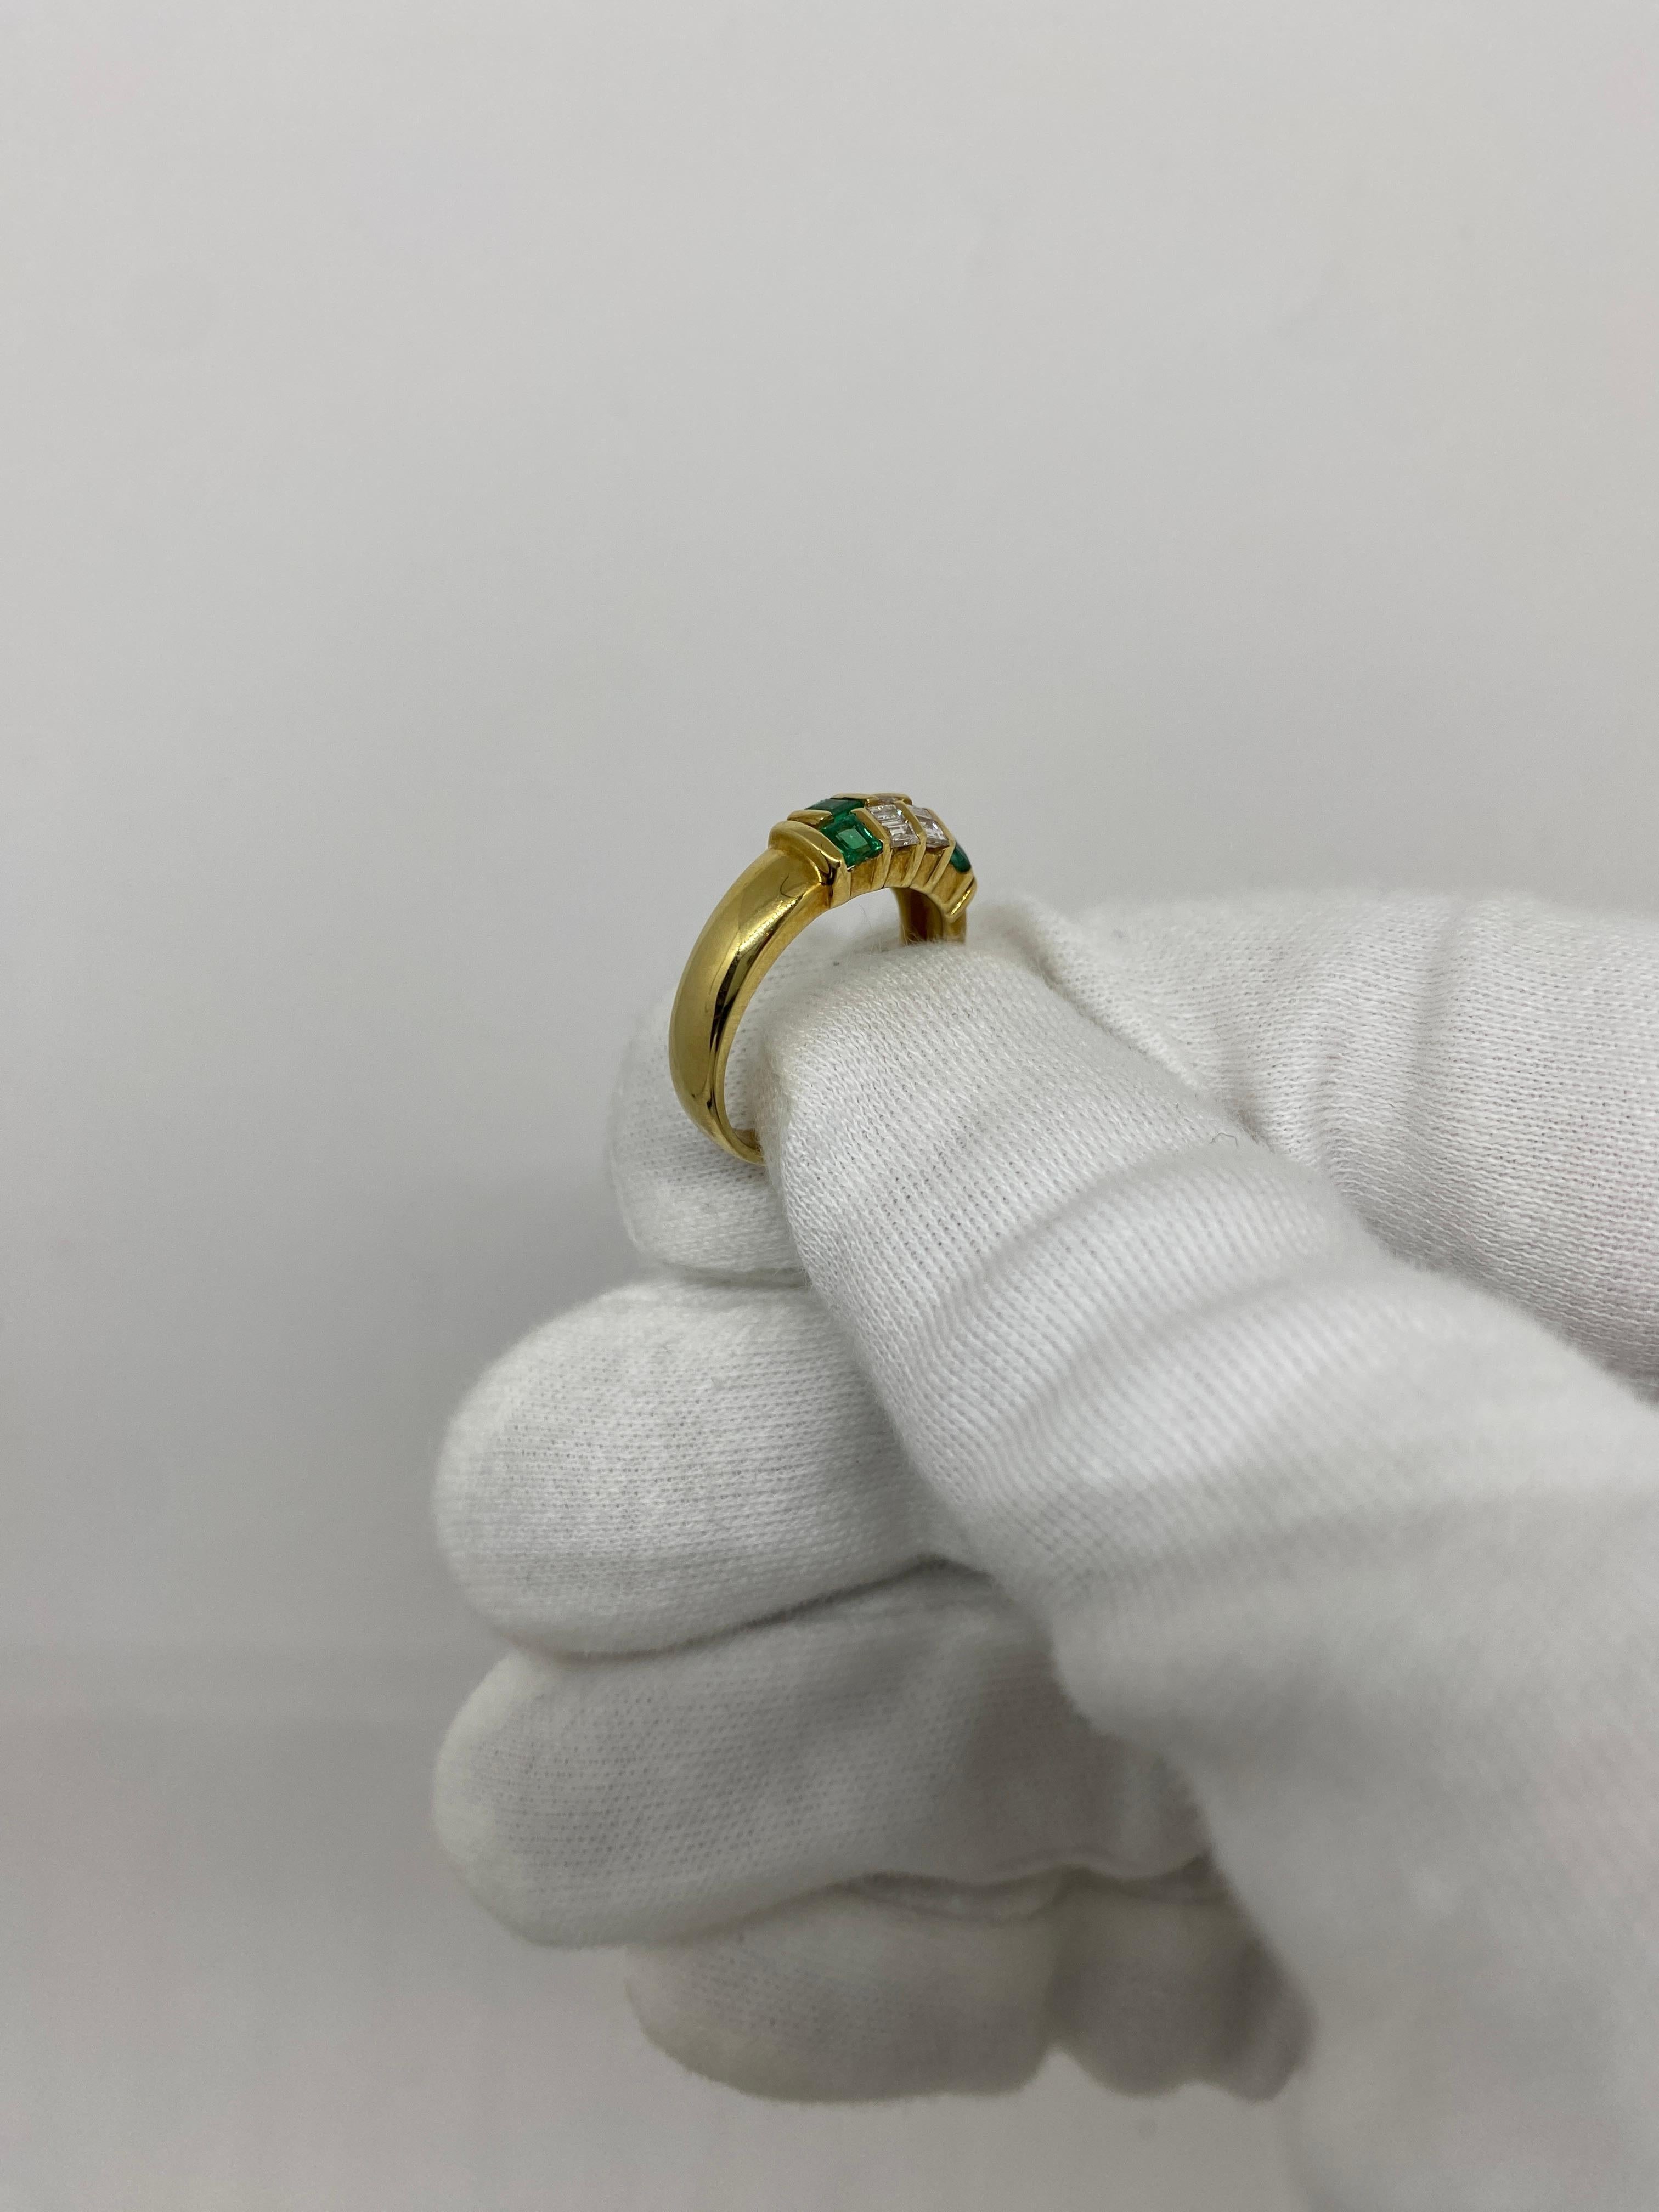 18 kt yellow gold ring with natural white diamonds 0.28 ct and natural emeralds 0.50 ct

Welcome to our jewelry collection, where every piece tells a story of timeless elegance and unparalleled craftsmanship. As a family-run business in Italy for